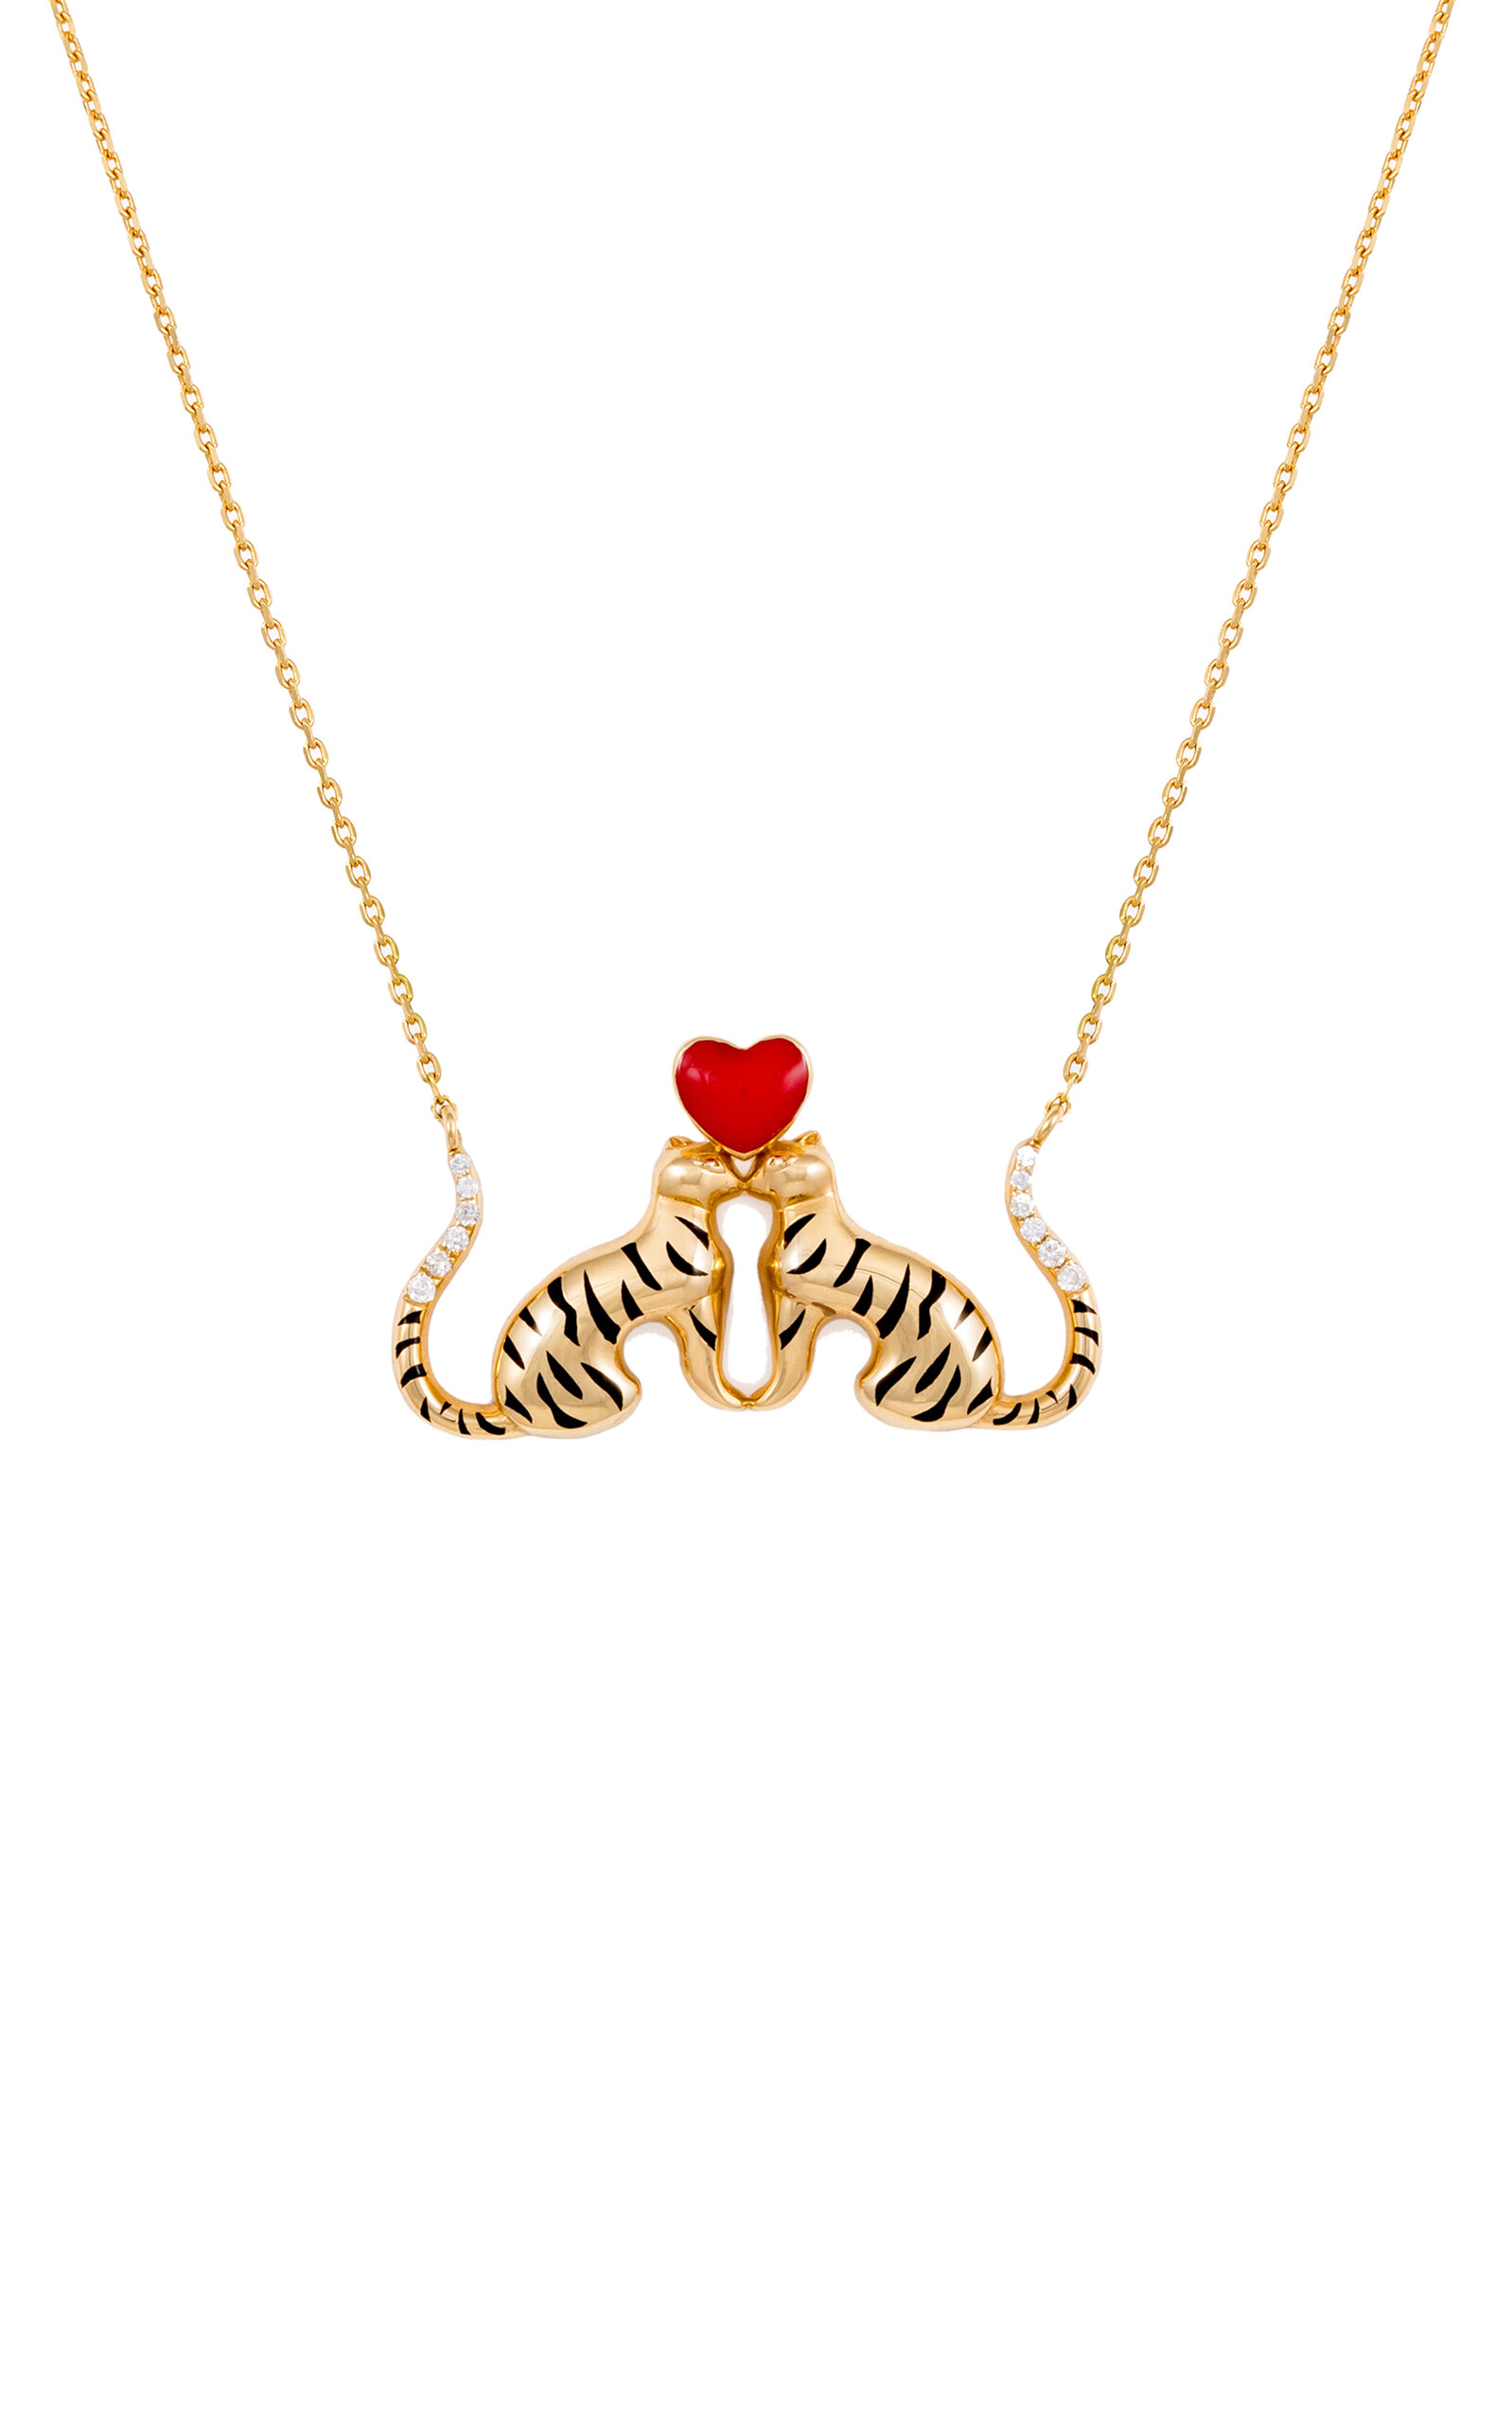 18K Yellow Gold Tiger of Love Diamond and Colored Enamel Necklace